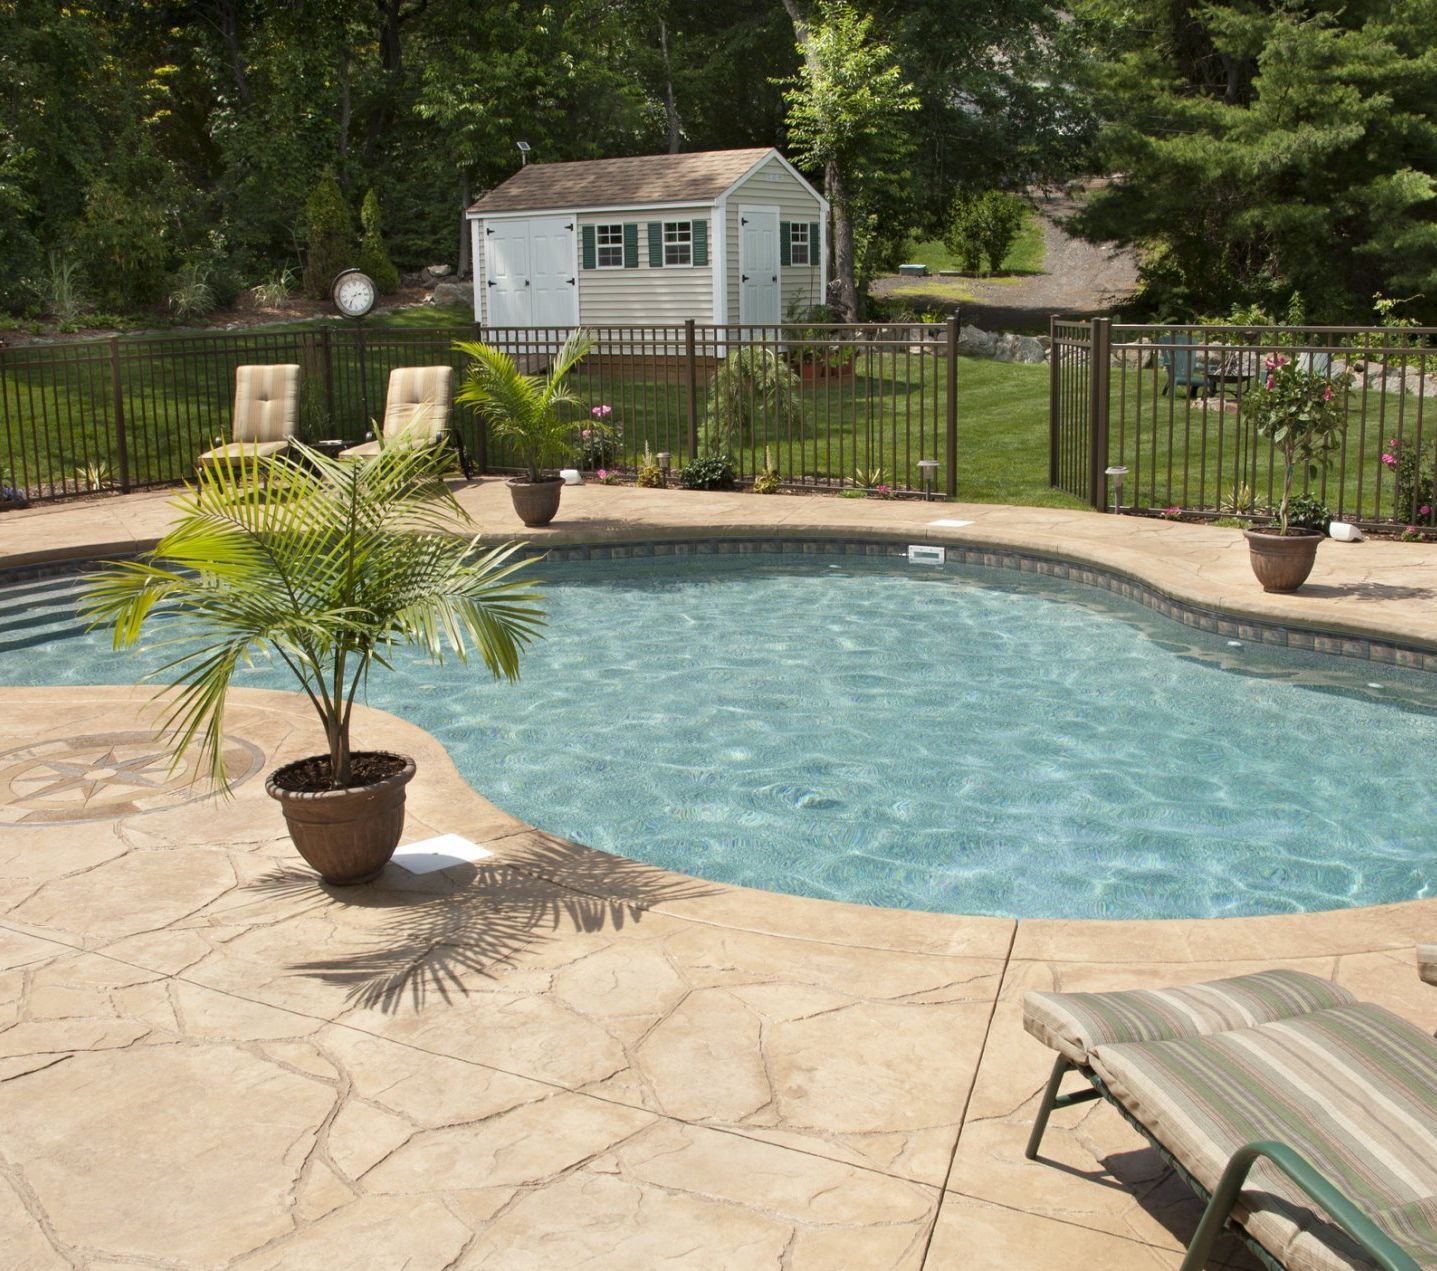 At Peavler Construction, We Always Recommend Installing a Pool Fence That Is Four Feet High.